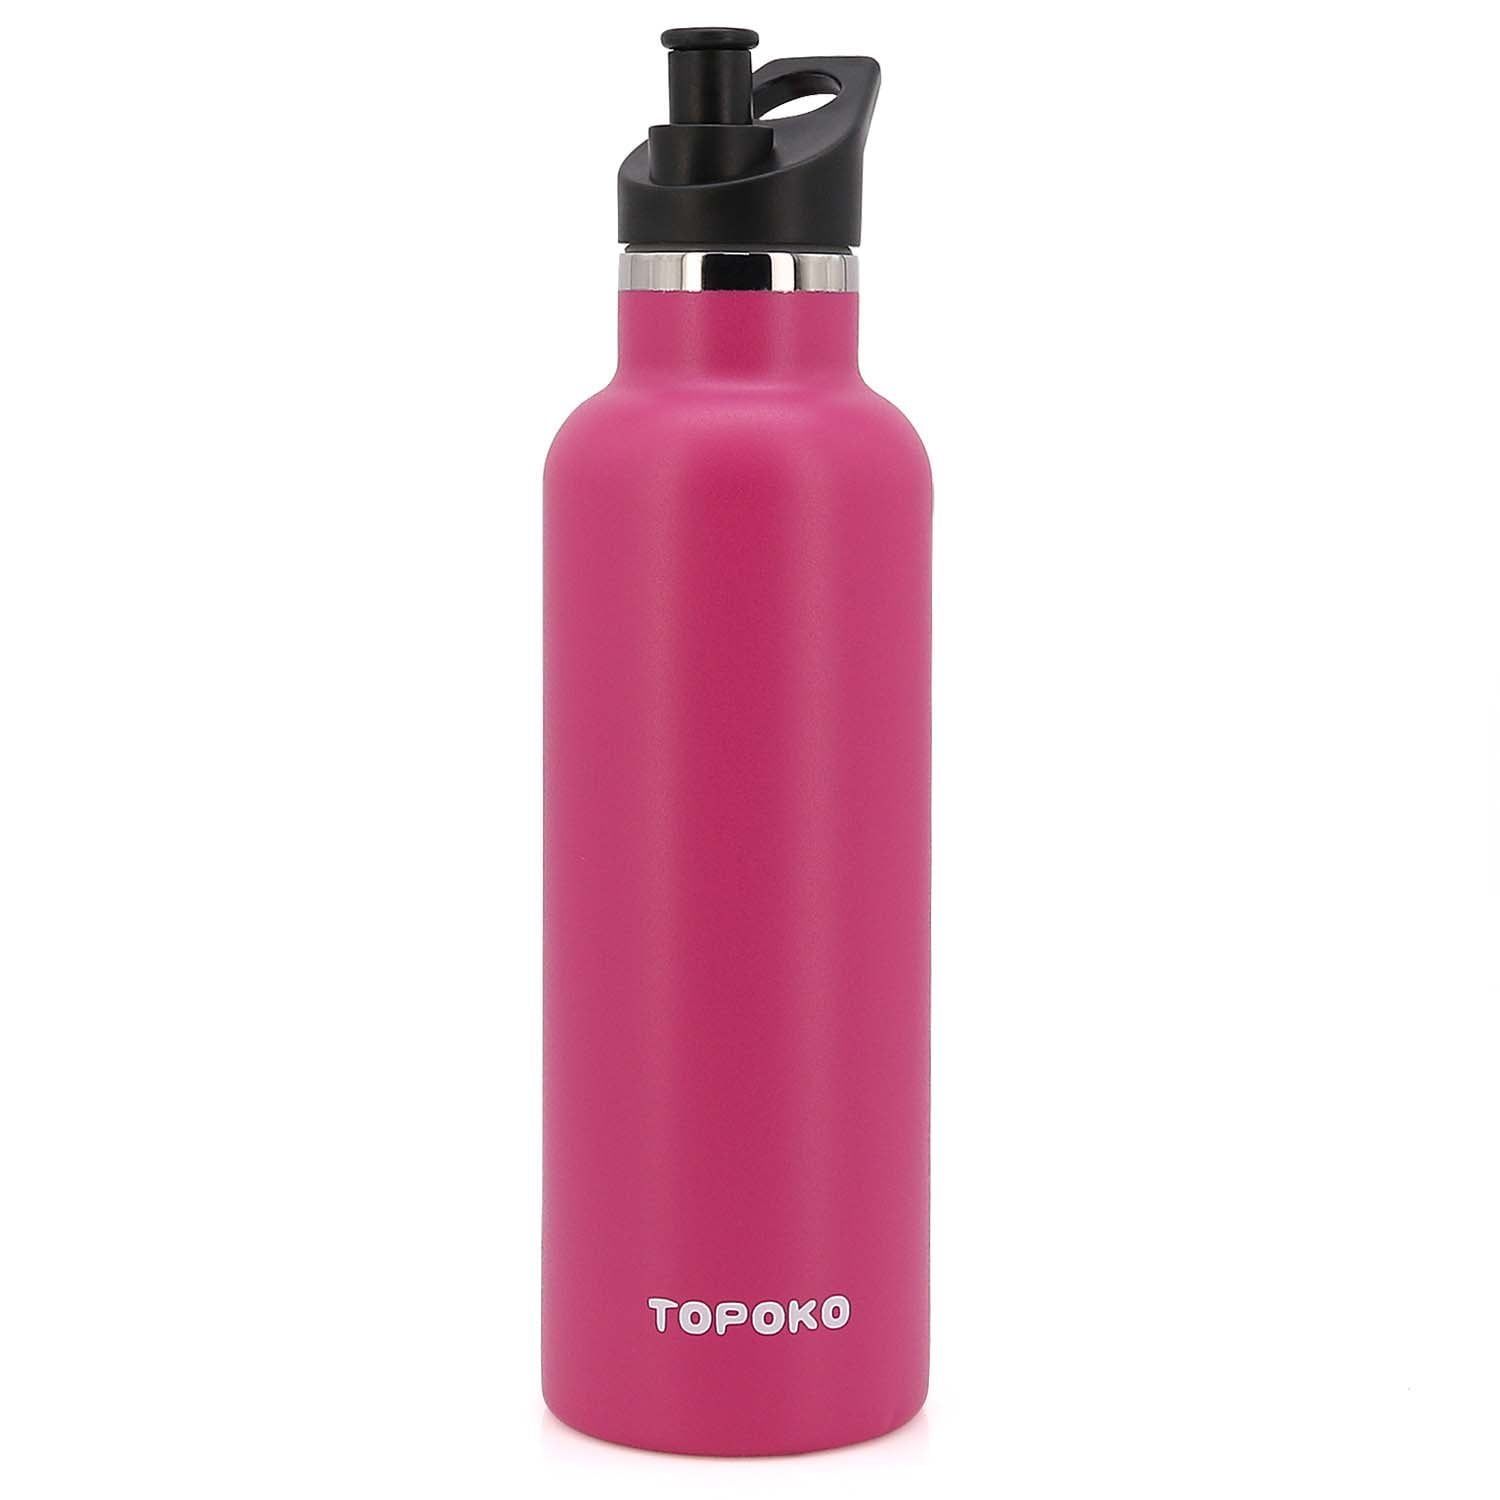 14 oz,Pink Yodo Stainless Steel Water Bottle Vacuum Insulated Thermo Flask Reusable Sports Bottle